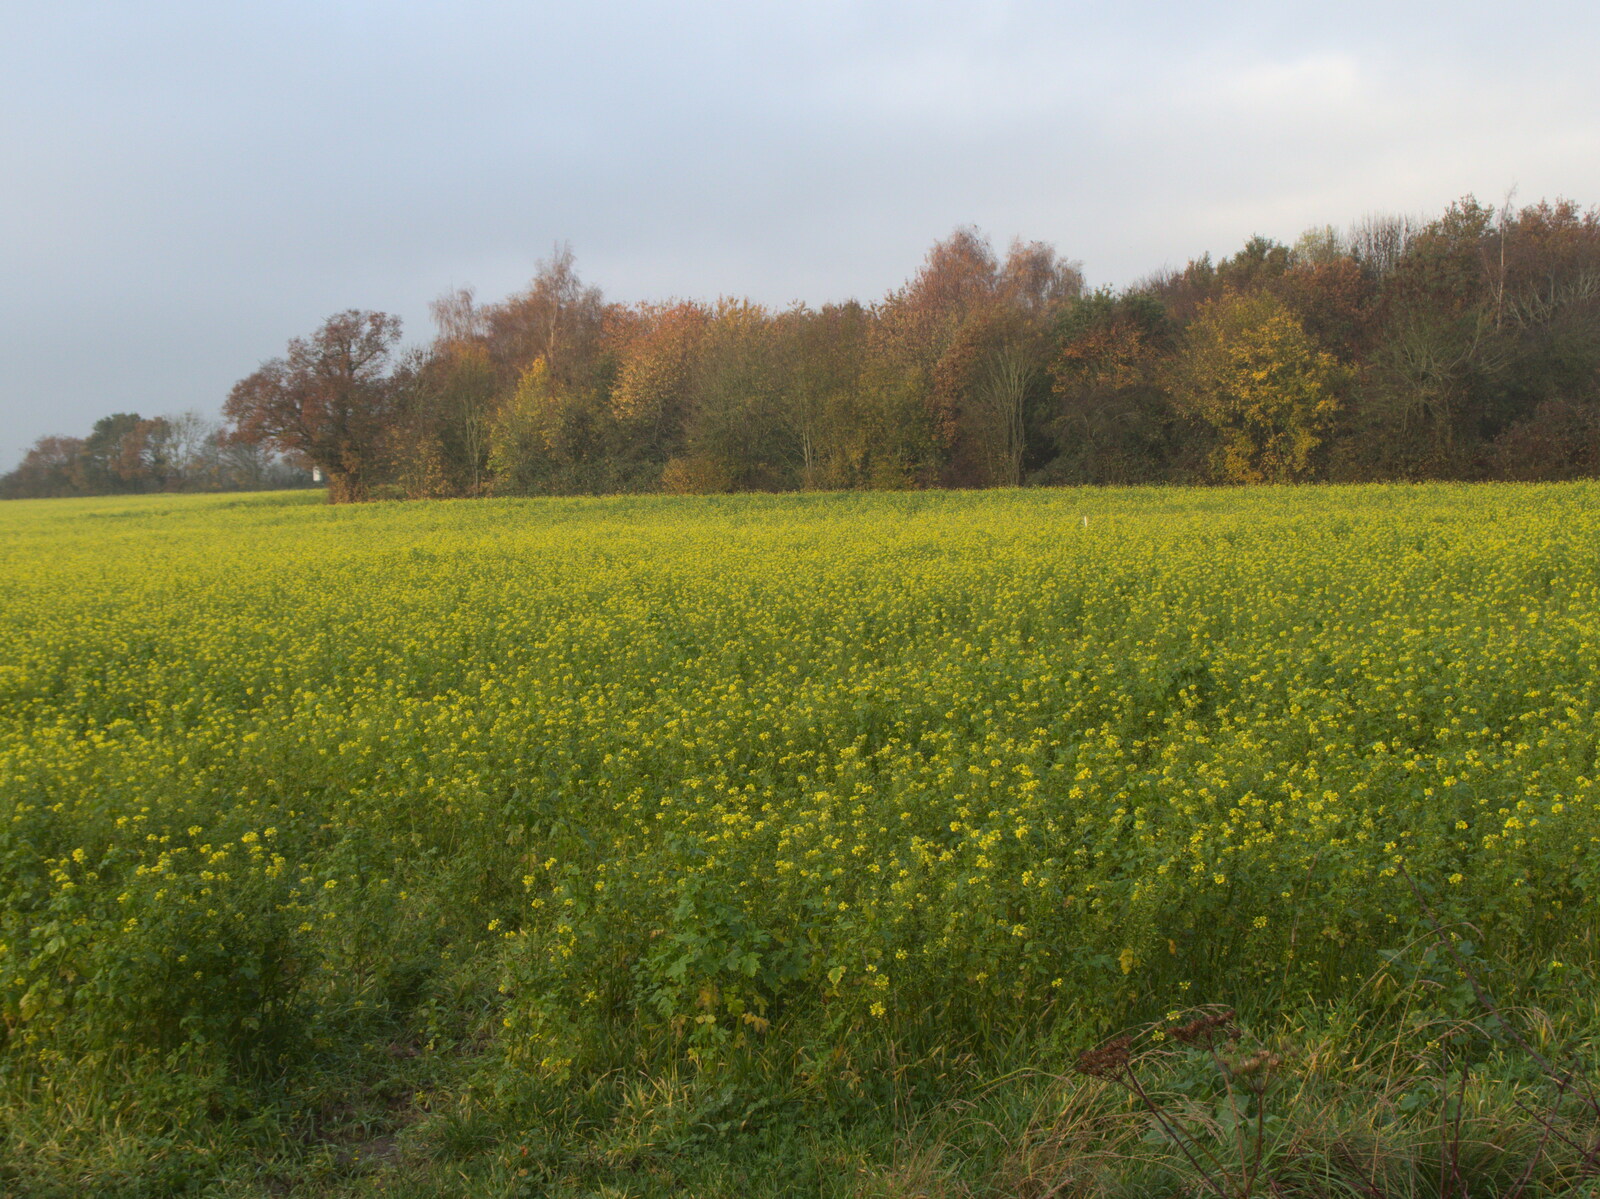 Something yellow which looks like Oilseed but isn't from Pre-Lockdown in Station 119, Eye, Suffolk - 4th November 2020